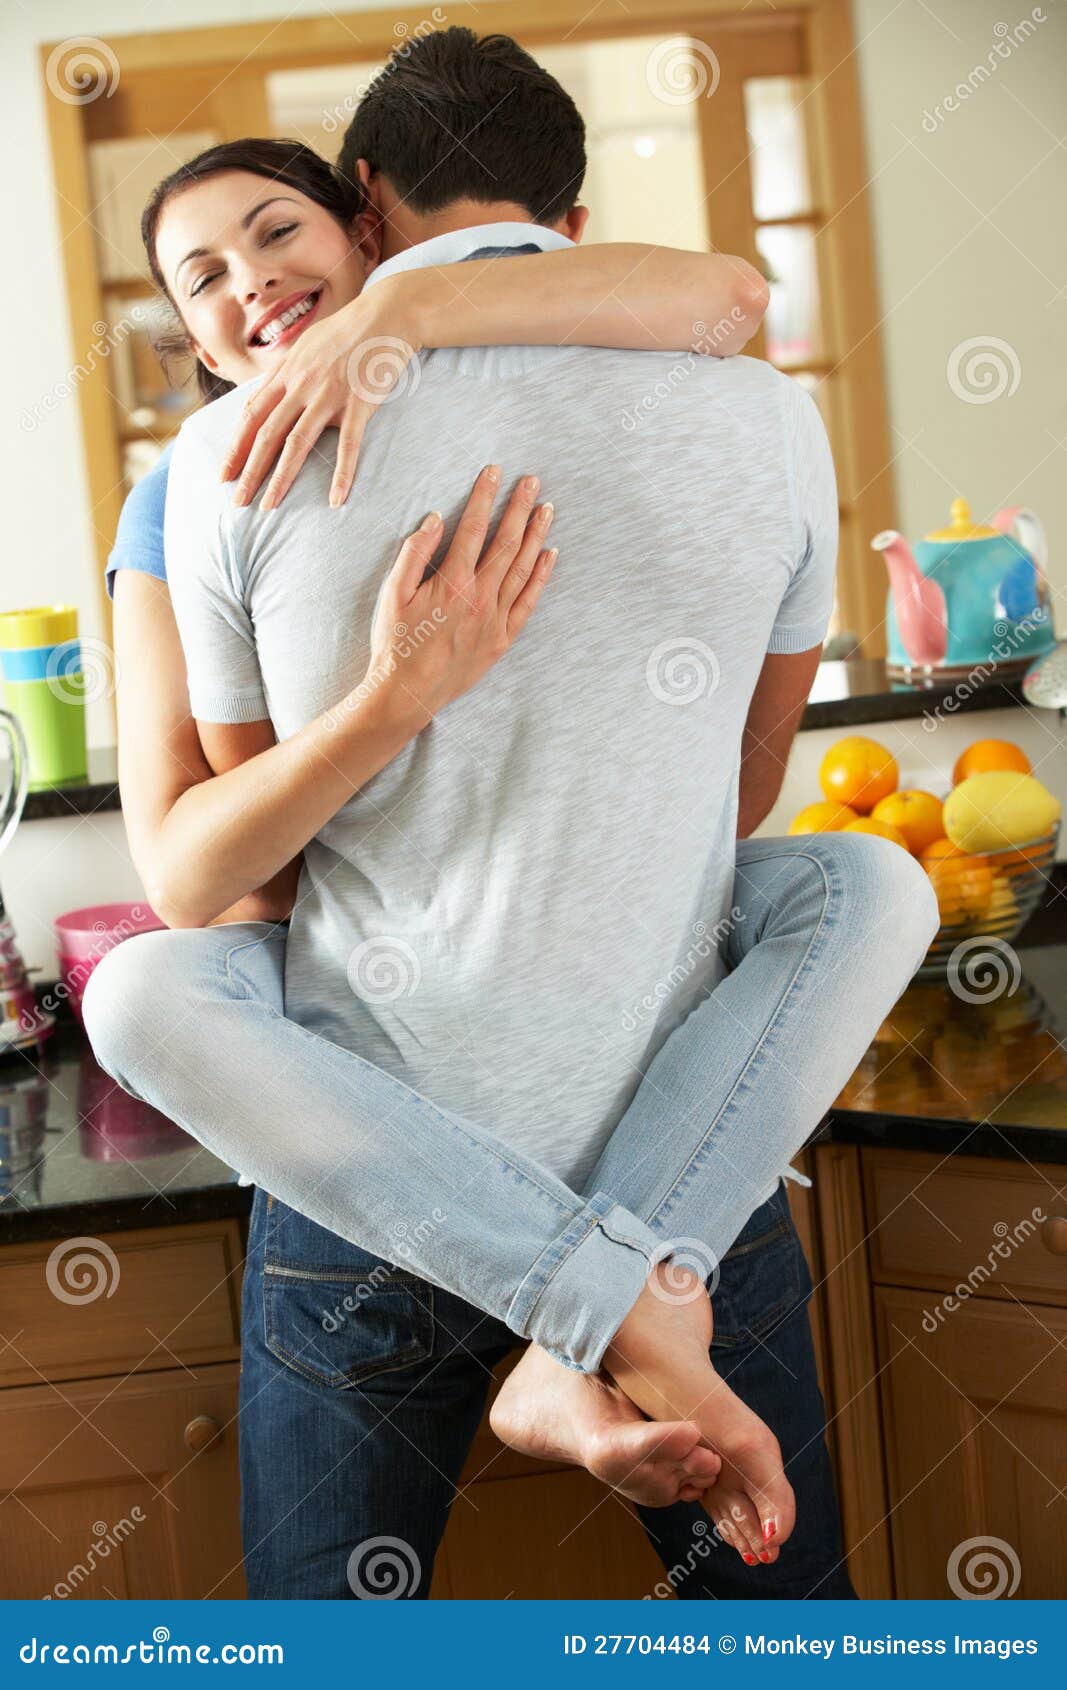 Romantic Couple Hugging in Kitchen Stock Photo - Image of female ...